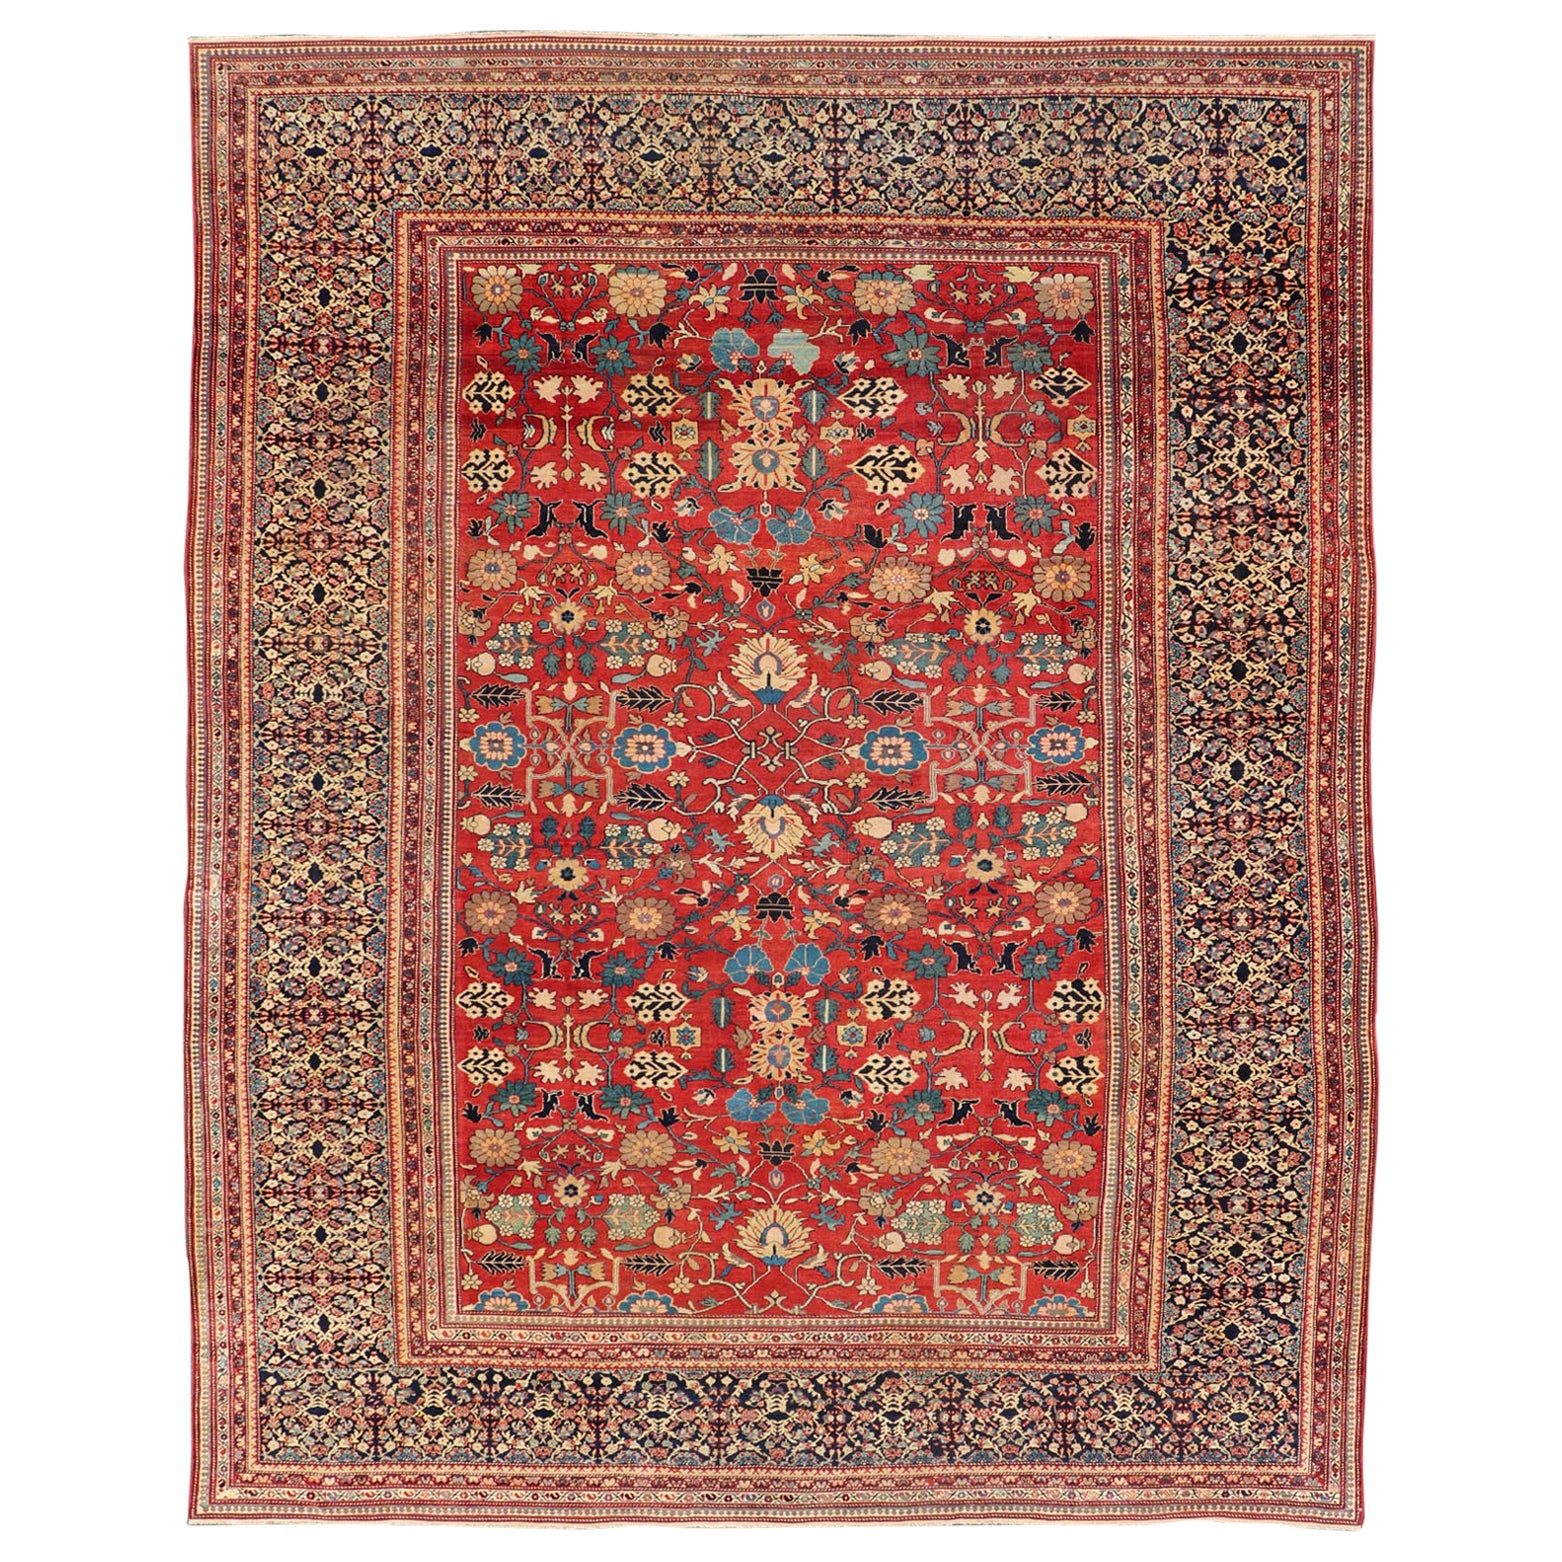 Very Finely Woven Antique Farahan Sarouk Rug with Intricate Border Design For Sale